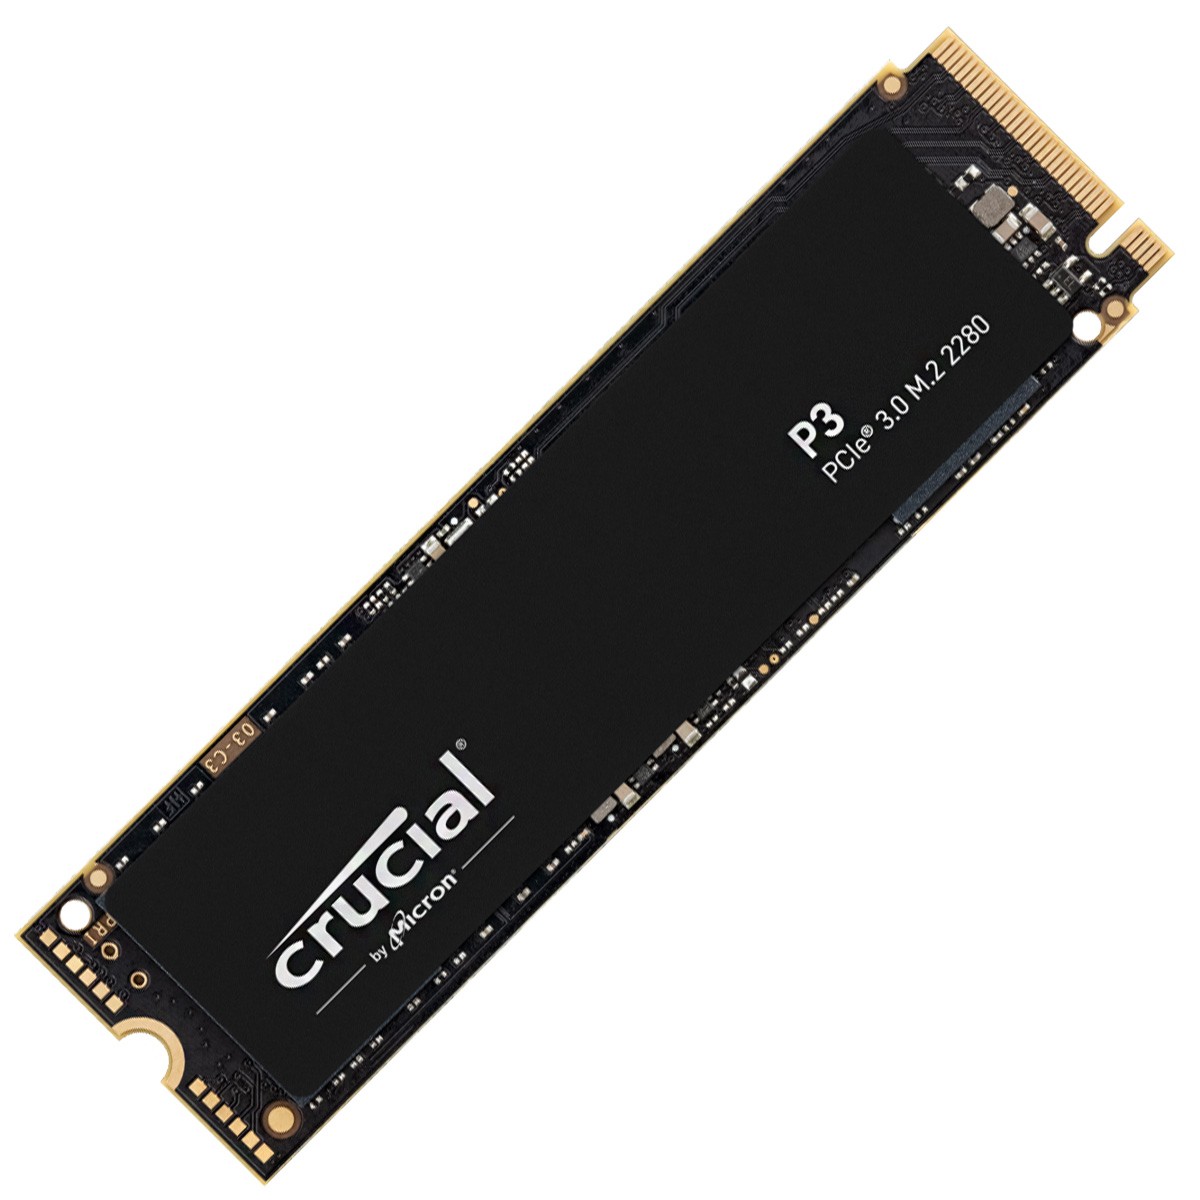 CRUCIAL P3 CT2000P3SSD8 SSD NVME M.2 NAND 3D 2To